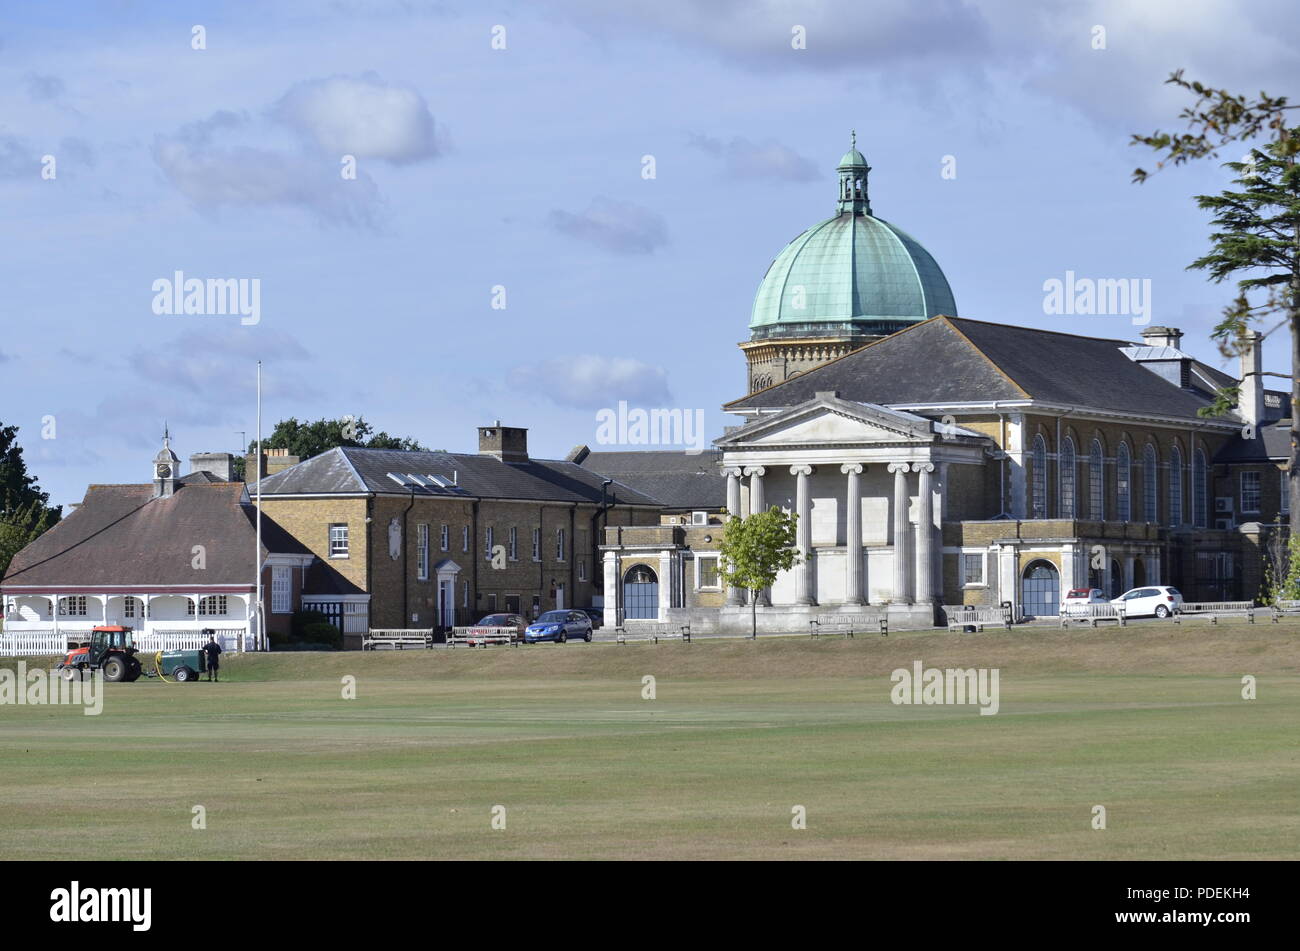 The Haileybury College in Hertford Heath, Hertfordshire, a public school formerly the East India Company College. It was founded in 1806 Stock Photo